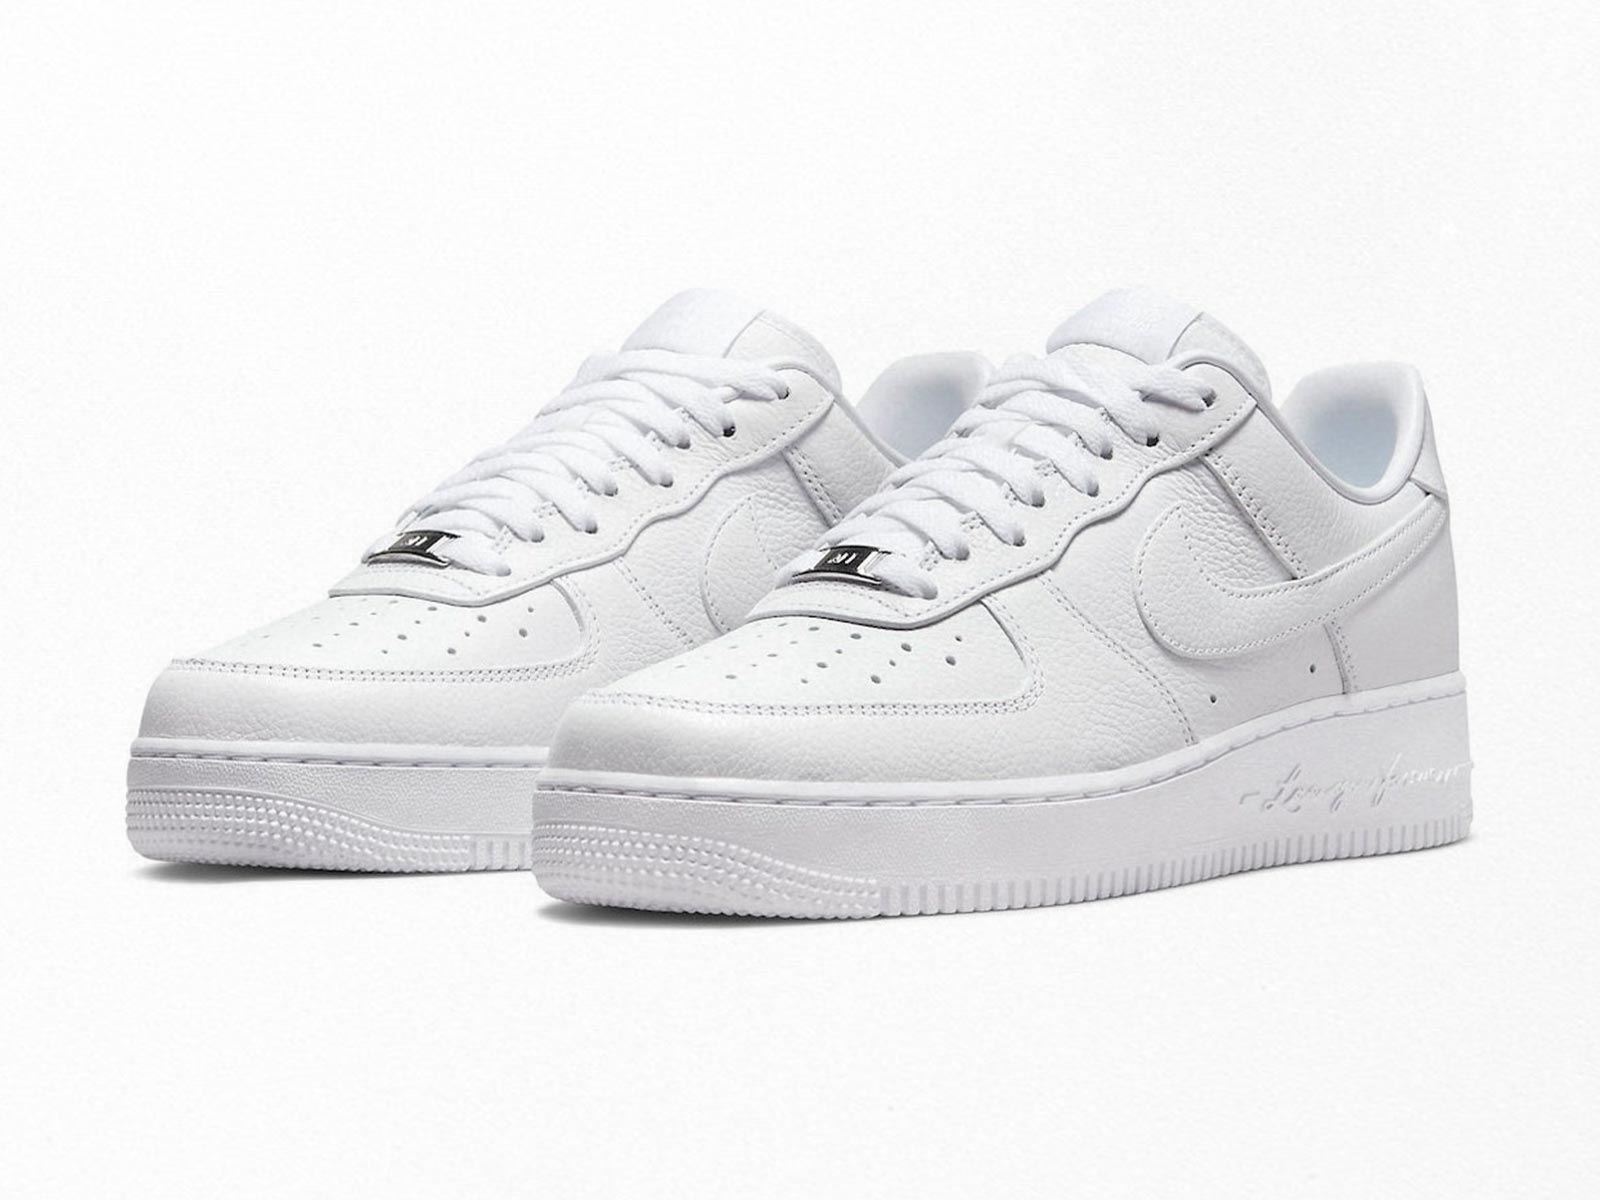 All about the Drake NOCTA x Nike Air Force 1 Low ‘Certified Lover Boy’